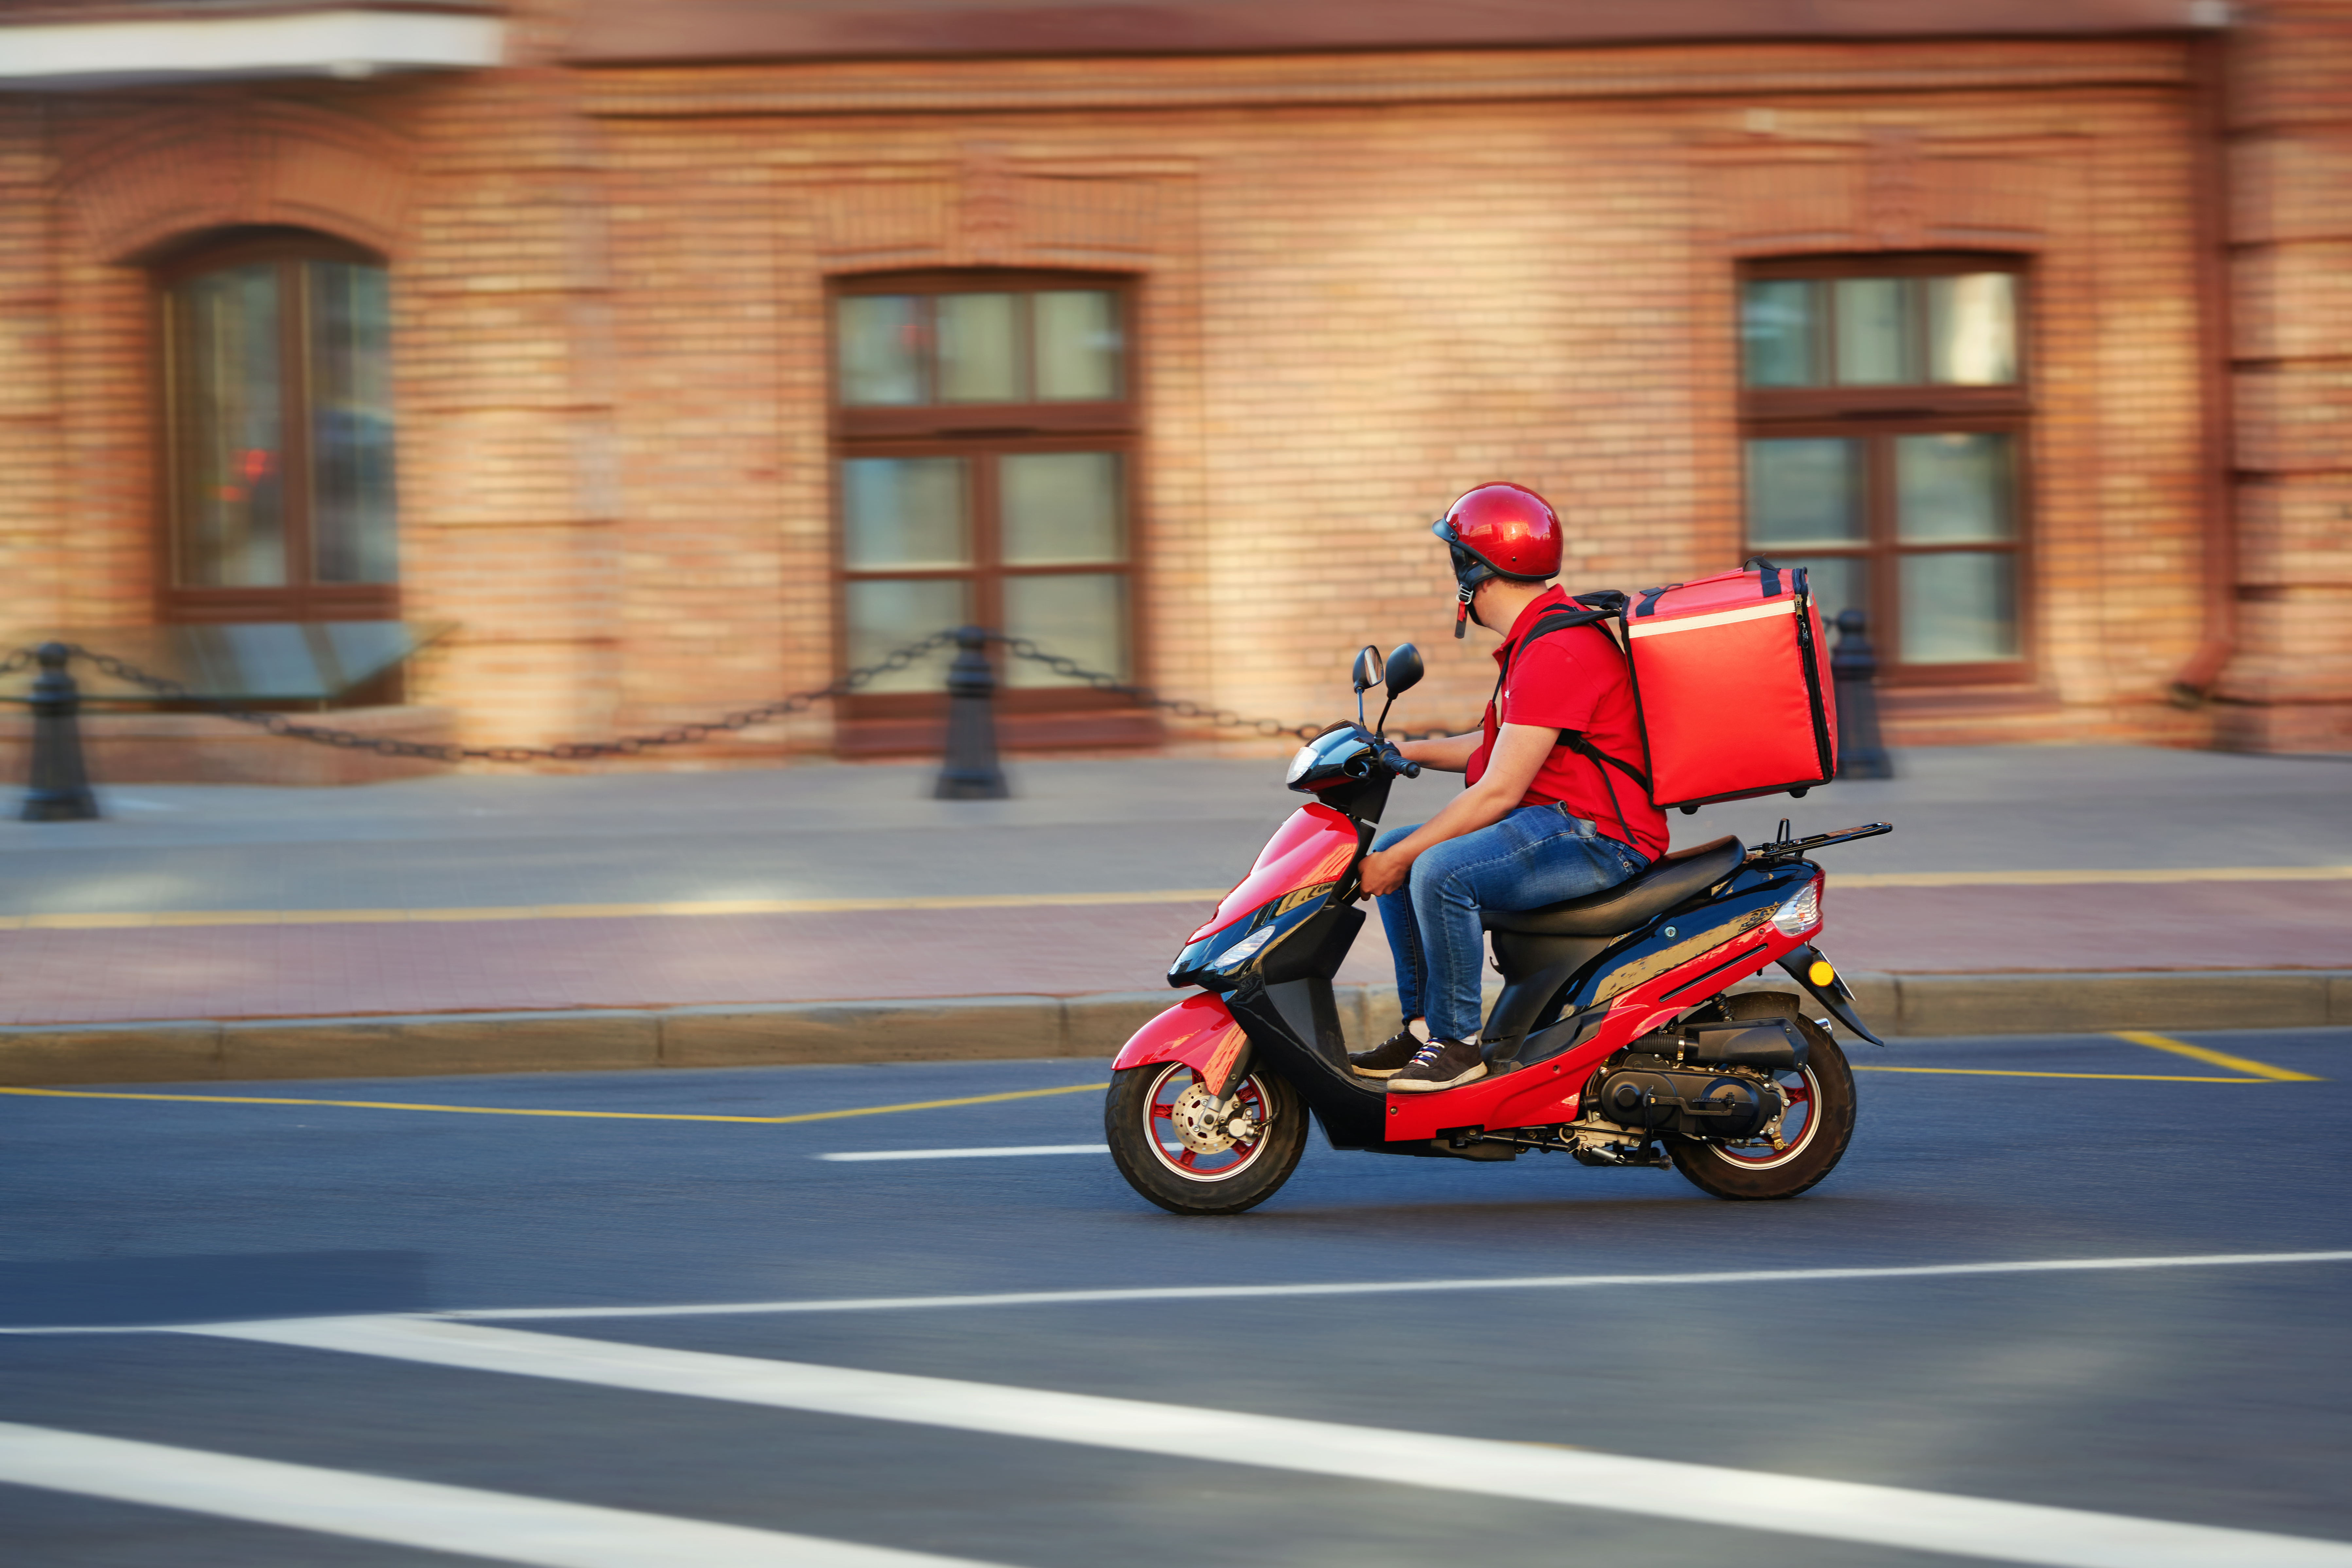 A biker in a red outfit bikes down an empty street with a red food delivery bag on his back